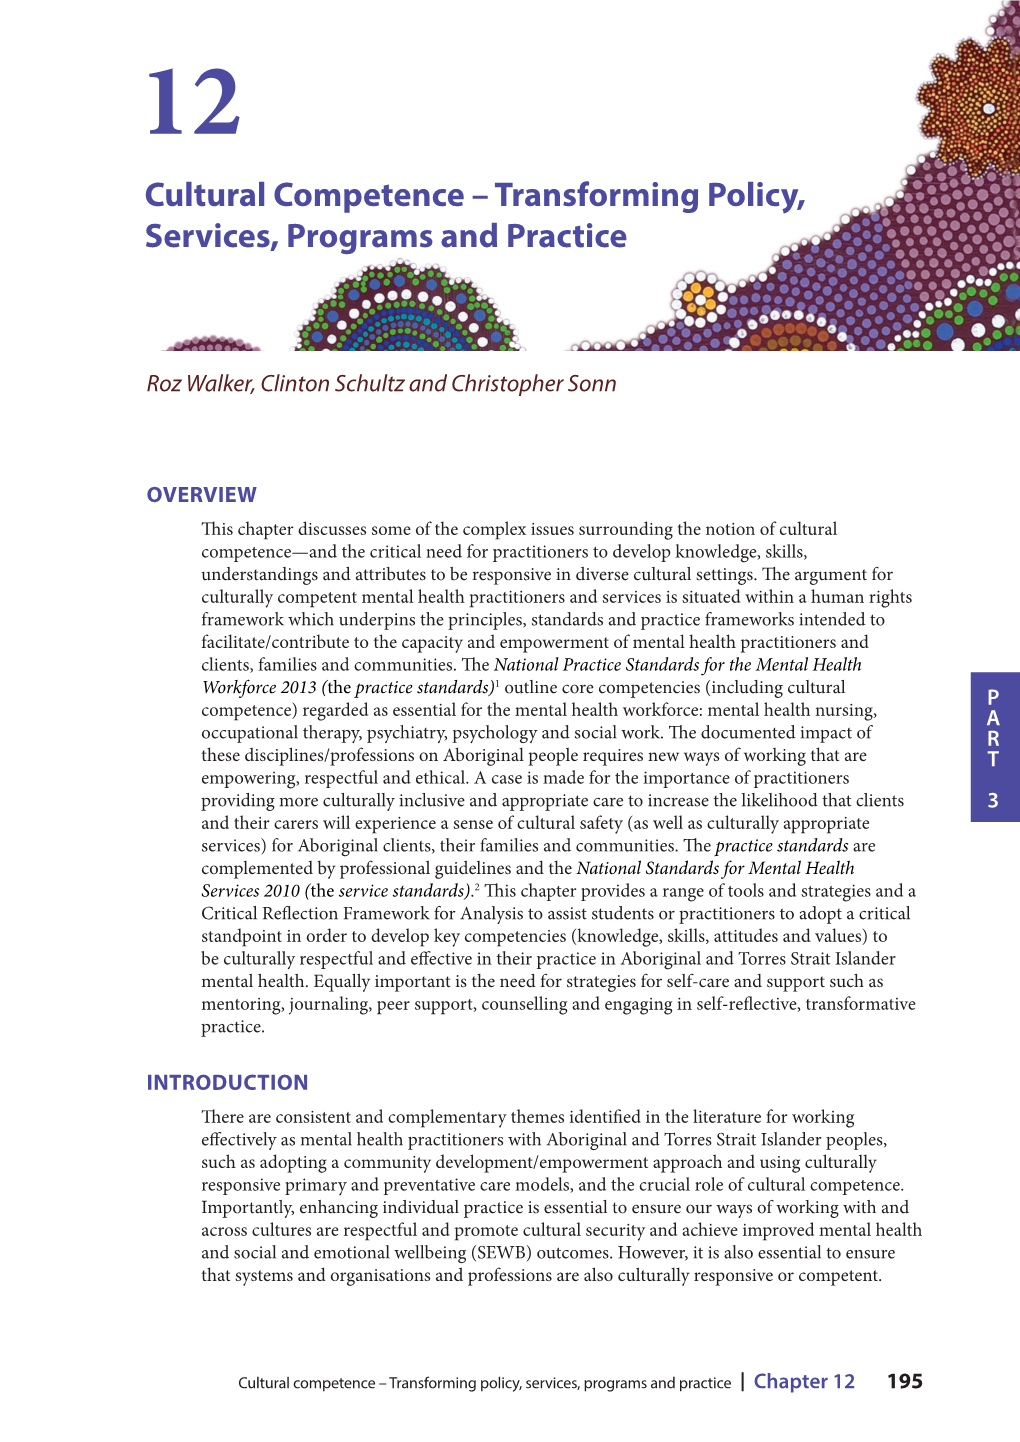 Cultural Competence – Transforming Policy, Services, Programs and Practice